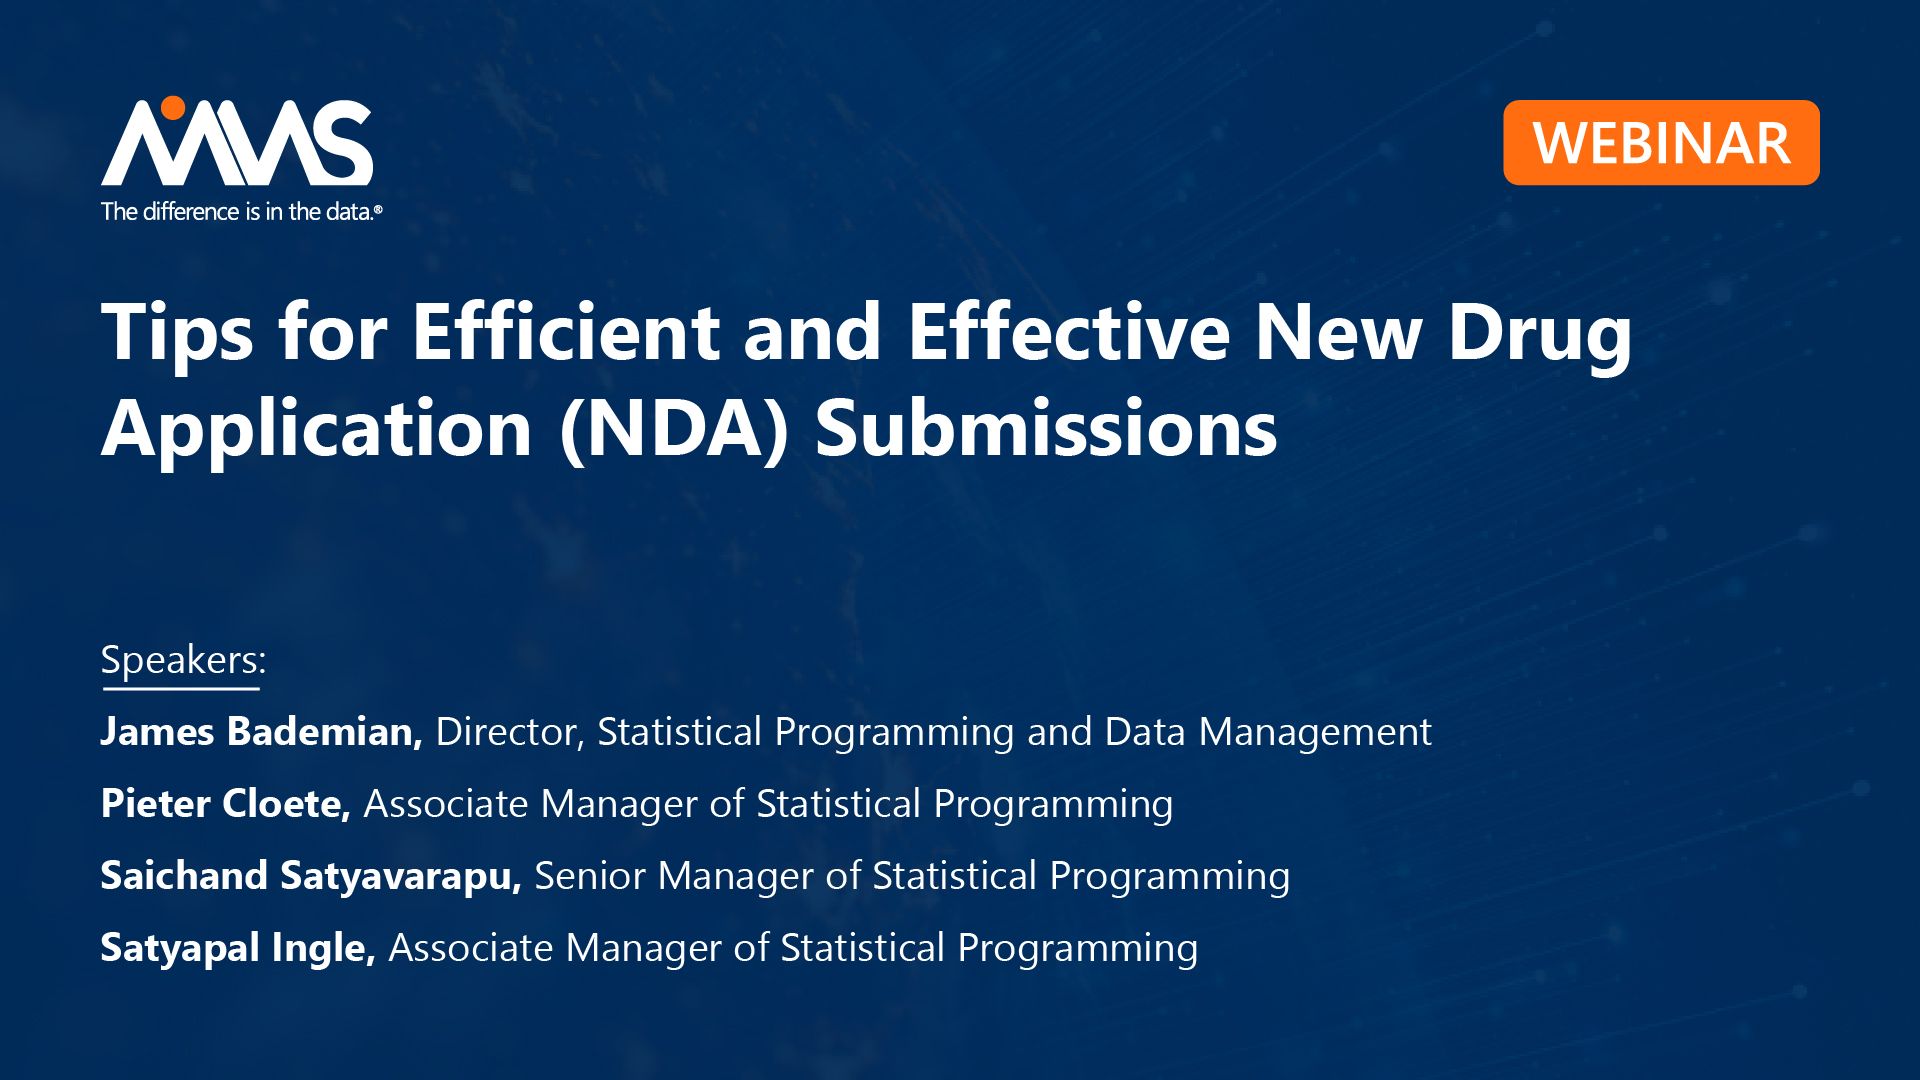 Tips for Effective and Efficient New Drug Application (NDA) Submissions